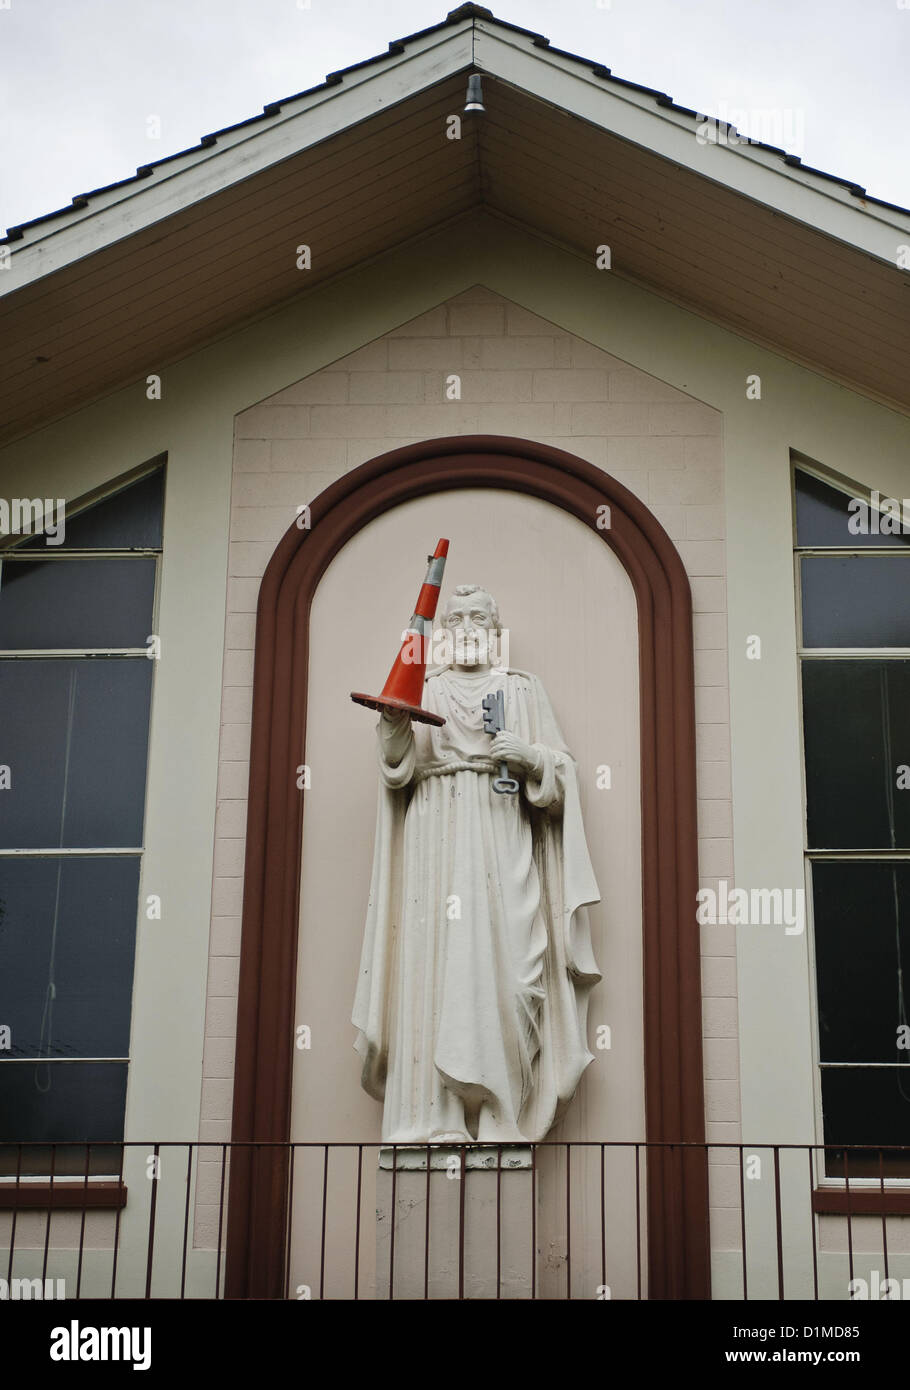 Dec. 27, 2012 - Christchurch, New Zealand - A statue of St. Peter at St. Peter's Catholic Church in the Christchurch, New Zealand, suburb of Beckenham has an orange safety cone covering  one hand, testament to damage caused by 2010 and 2011 earthquakes. (Credit Image: © PJ Heller/ZUMAPRESS.com) Stock Photo